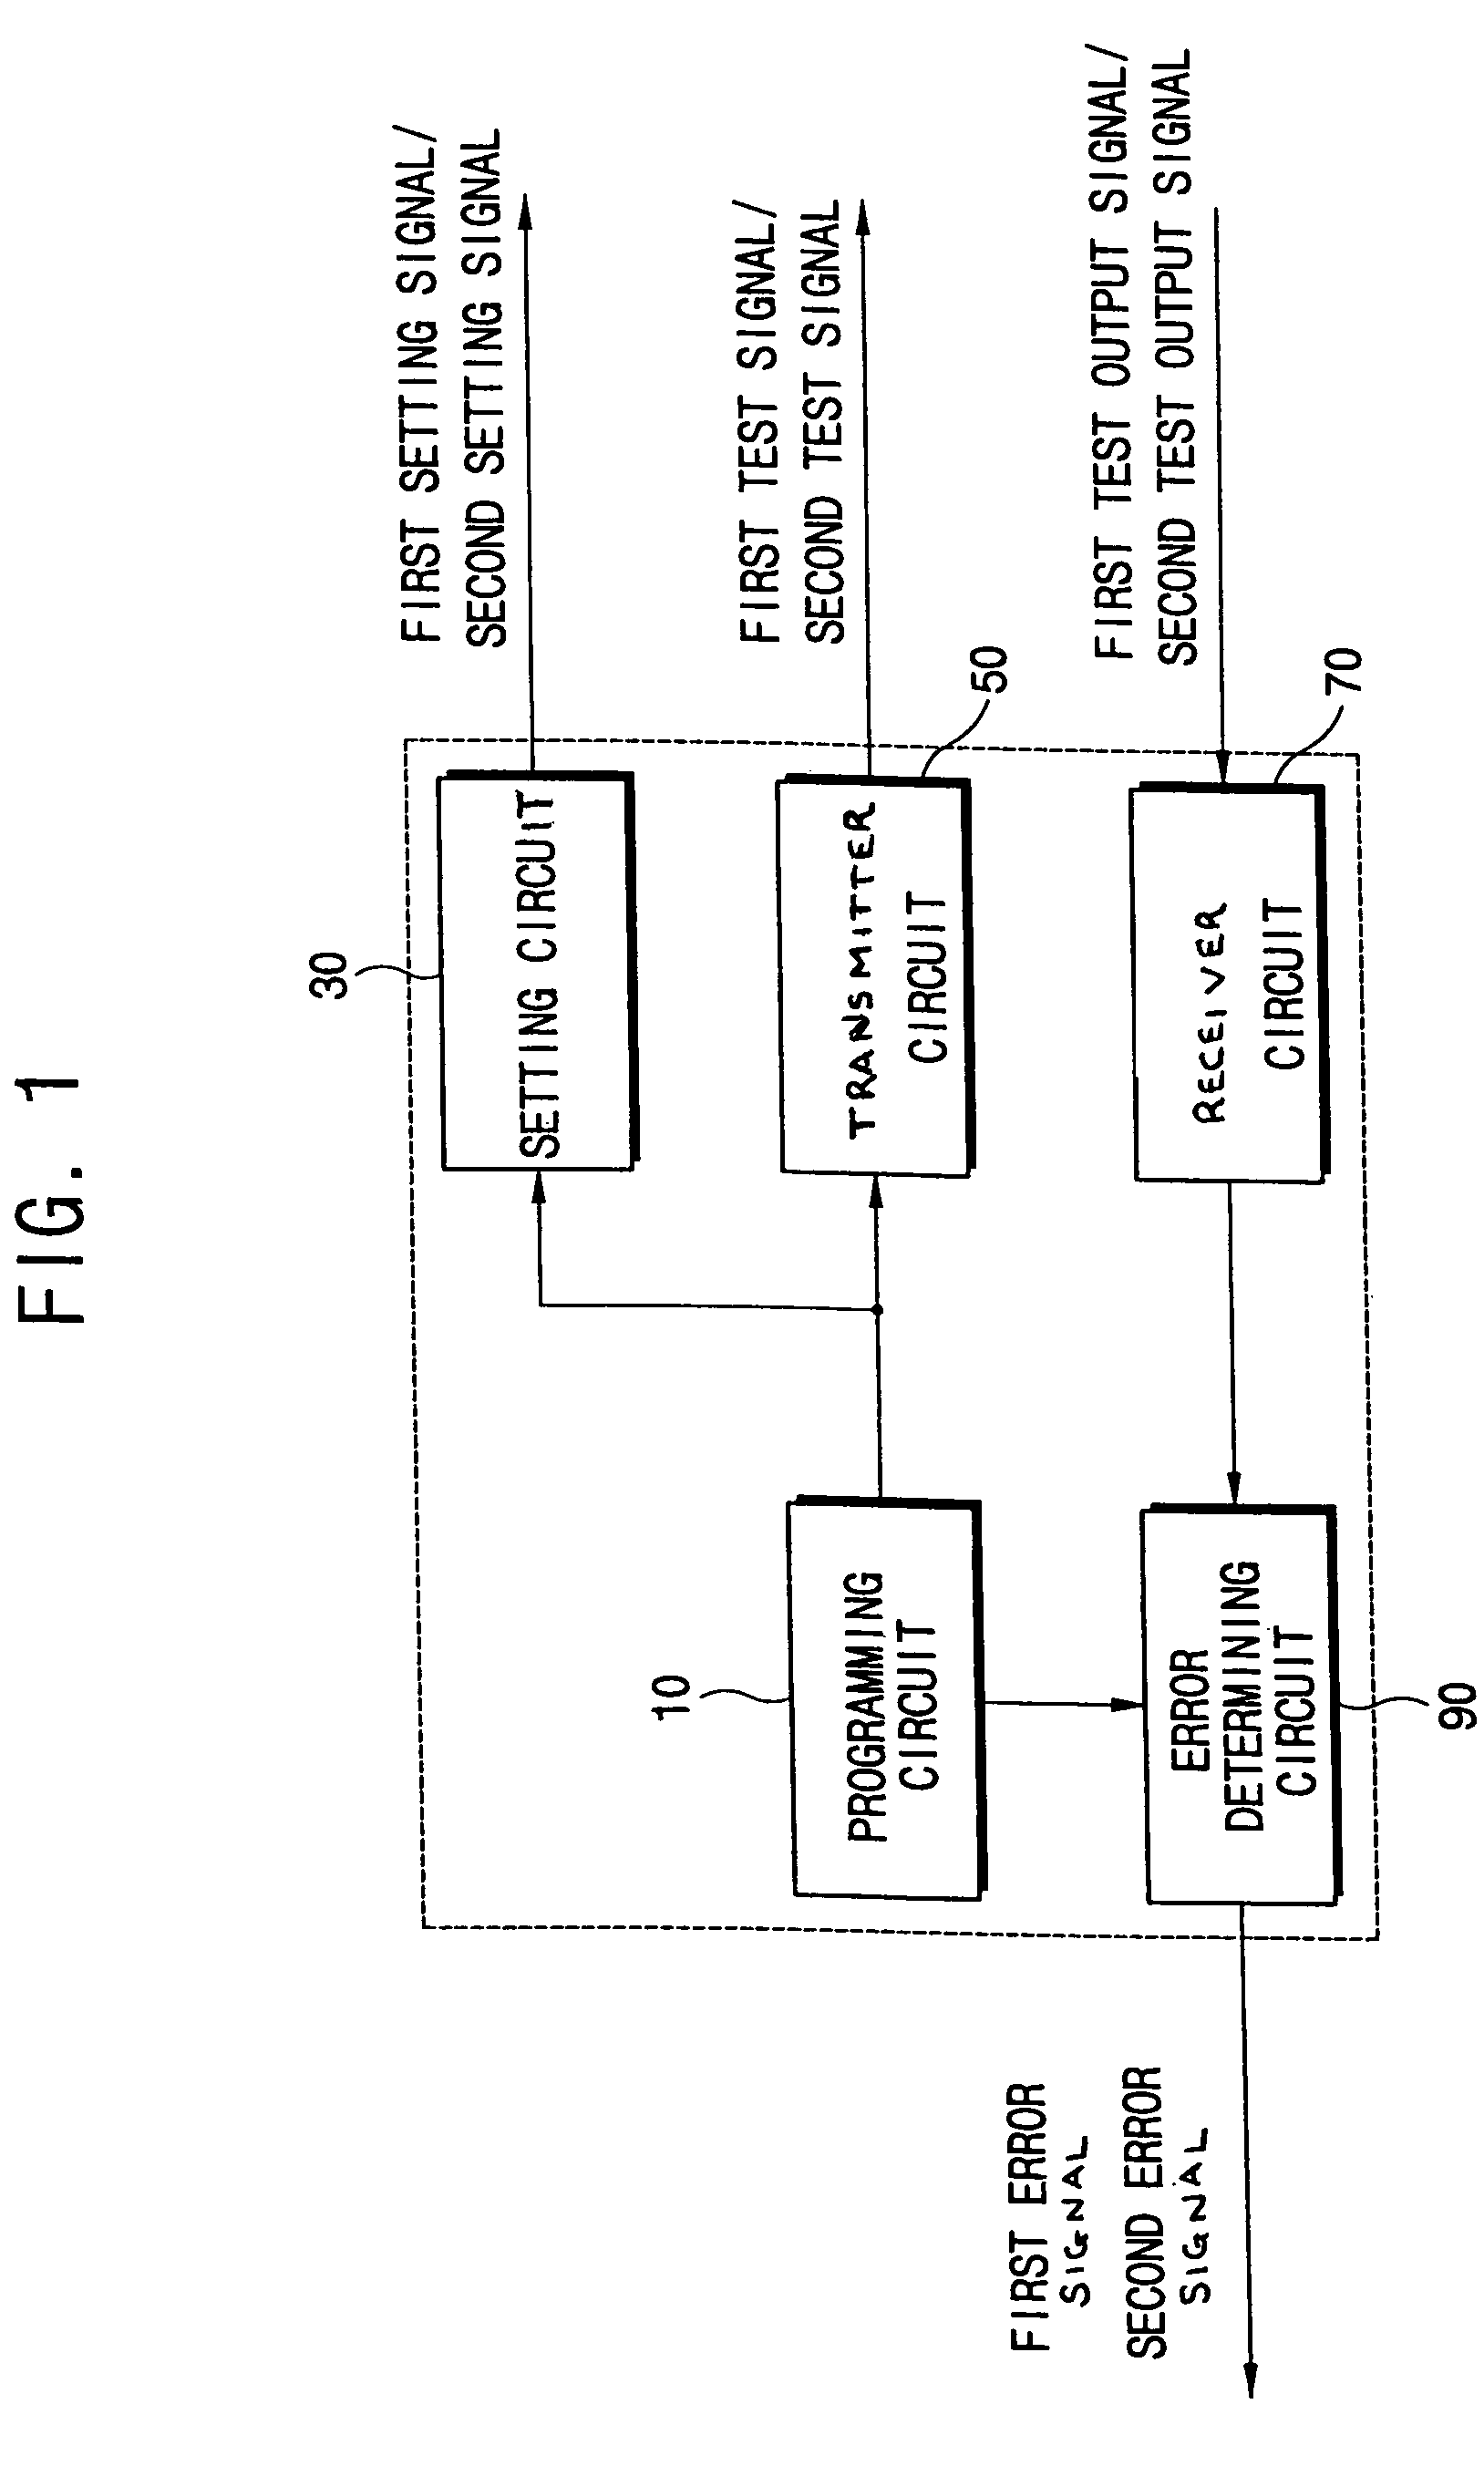 Method and apparatus for testing semiconductor memory device and related testing methods